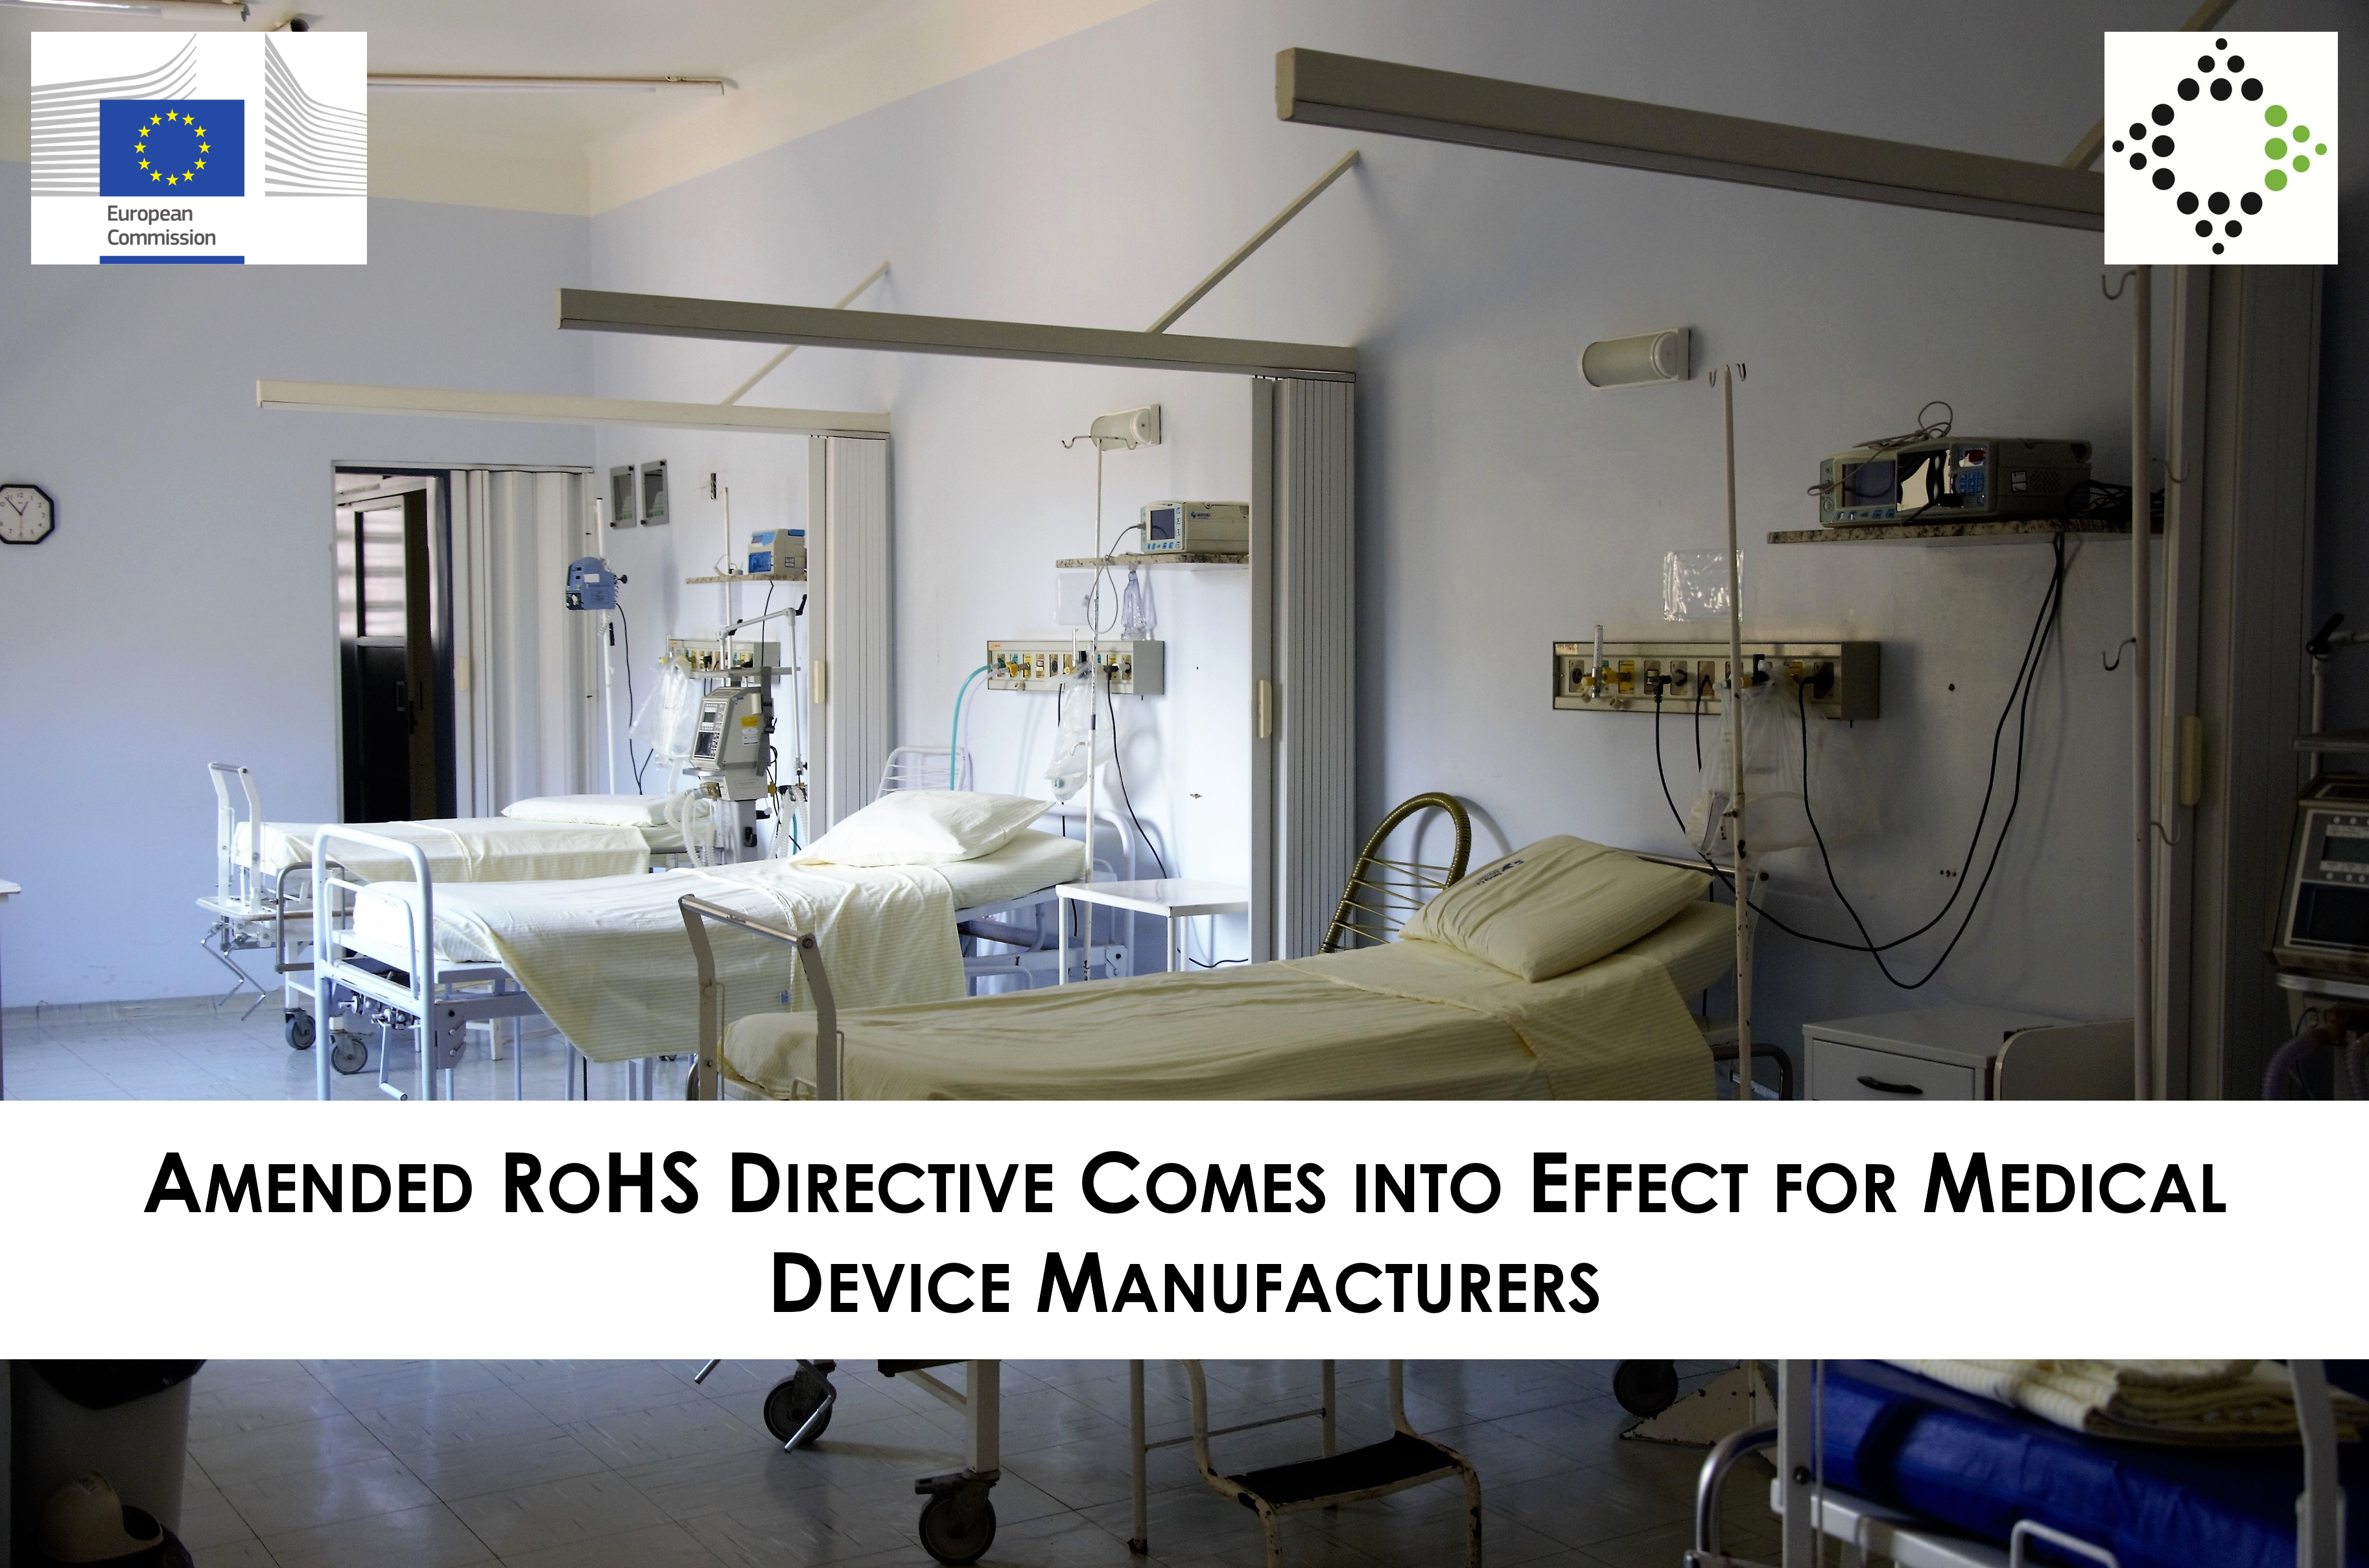 All white hospital room with two beds and RoHS Directive approved medical devices.